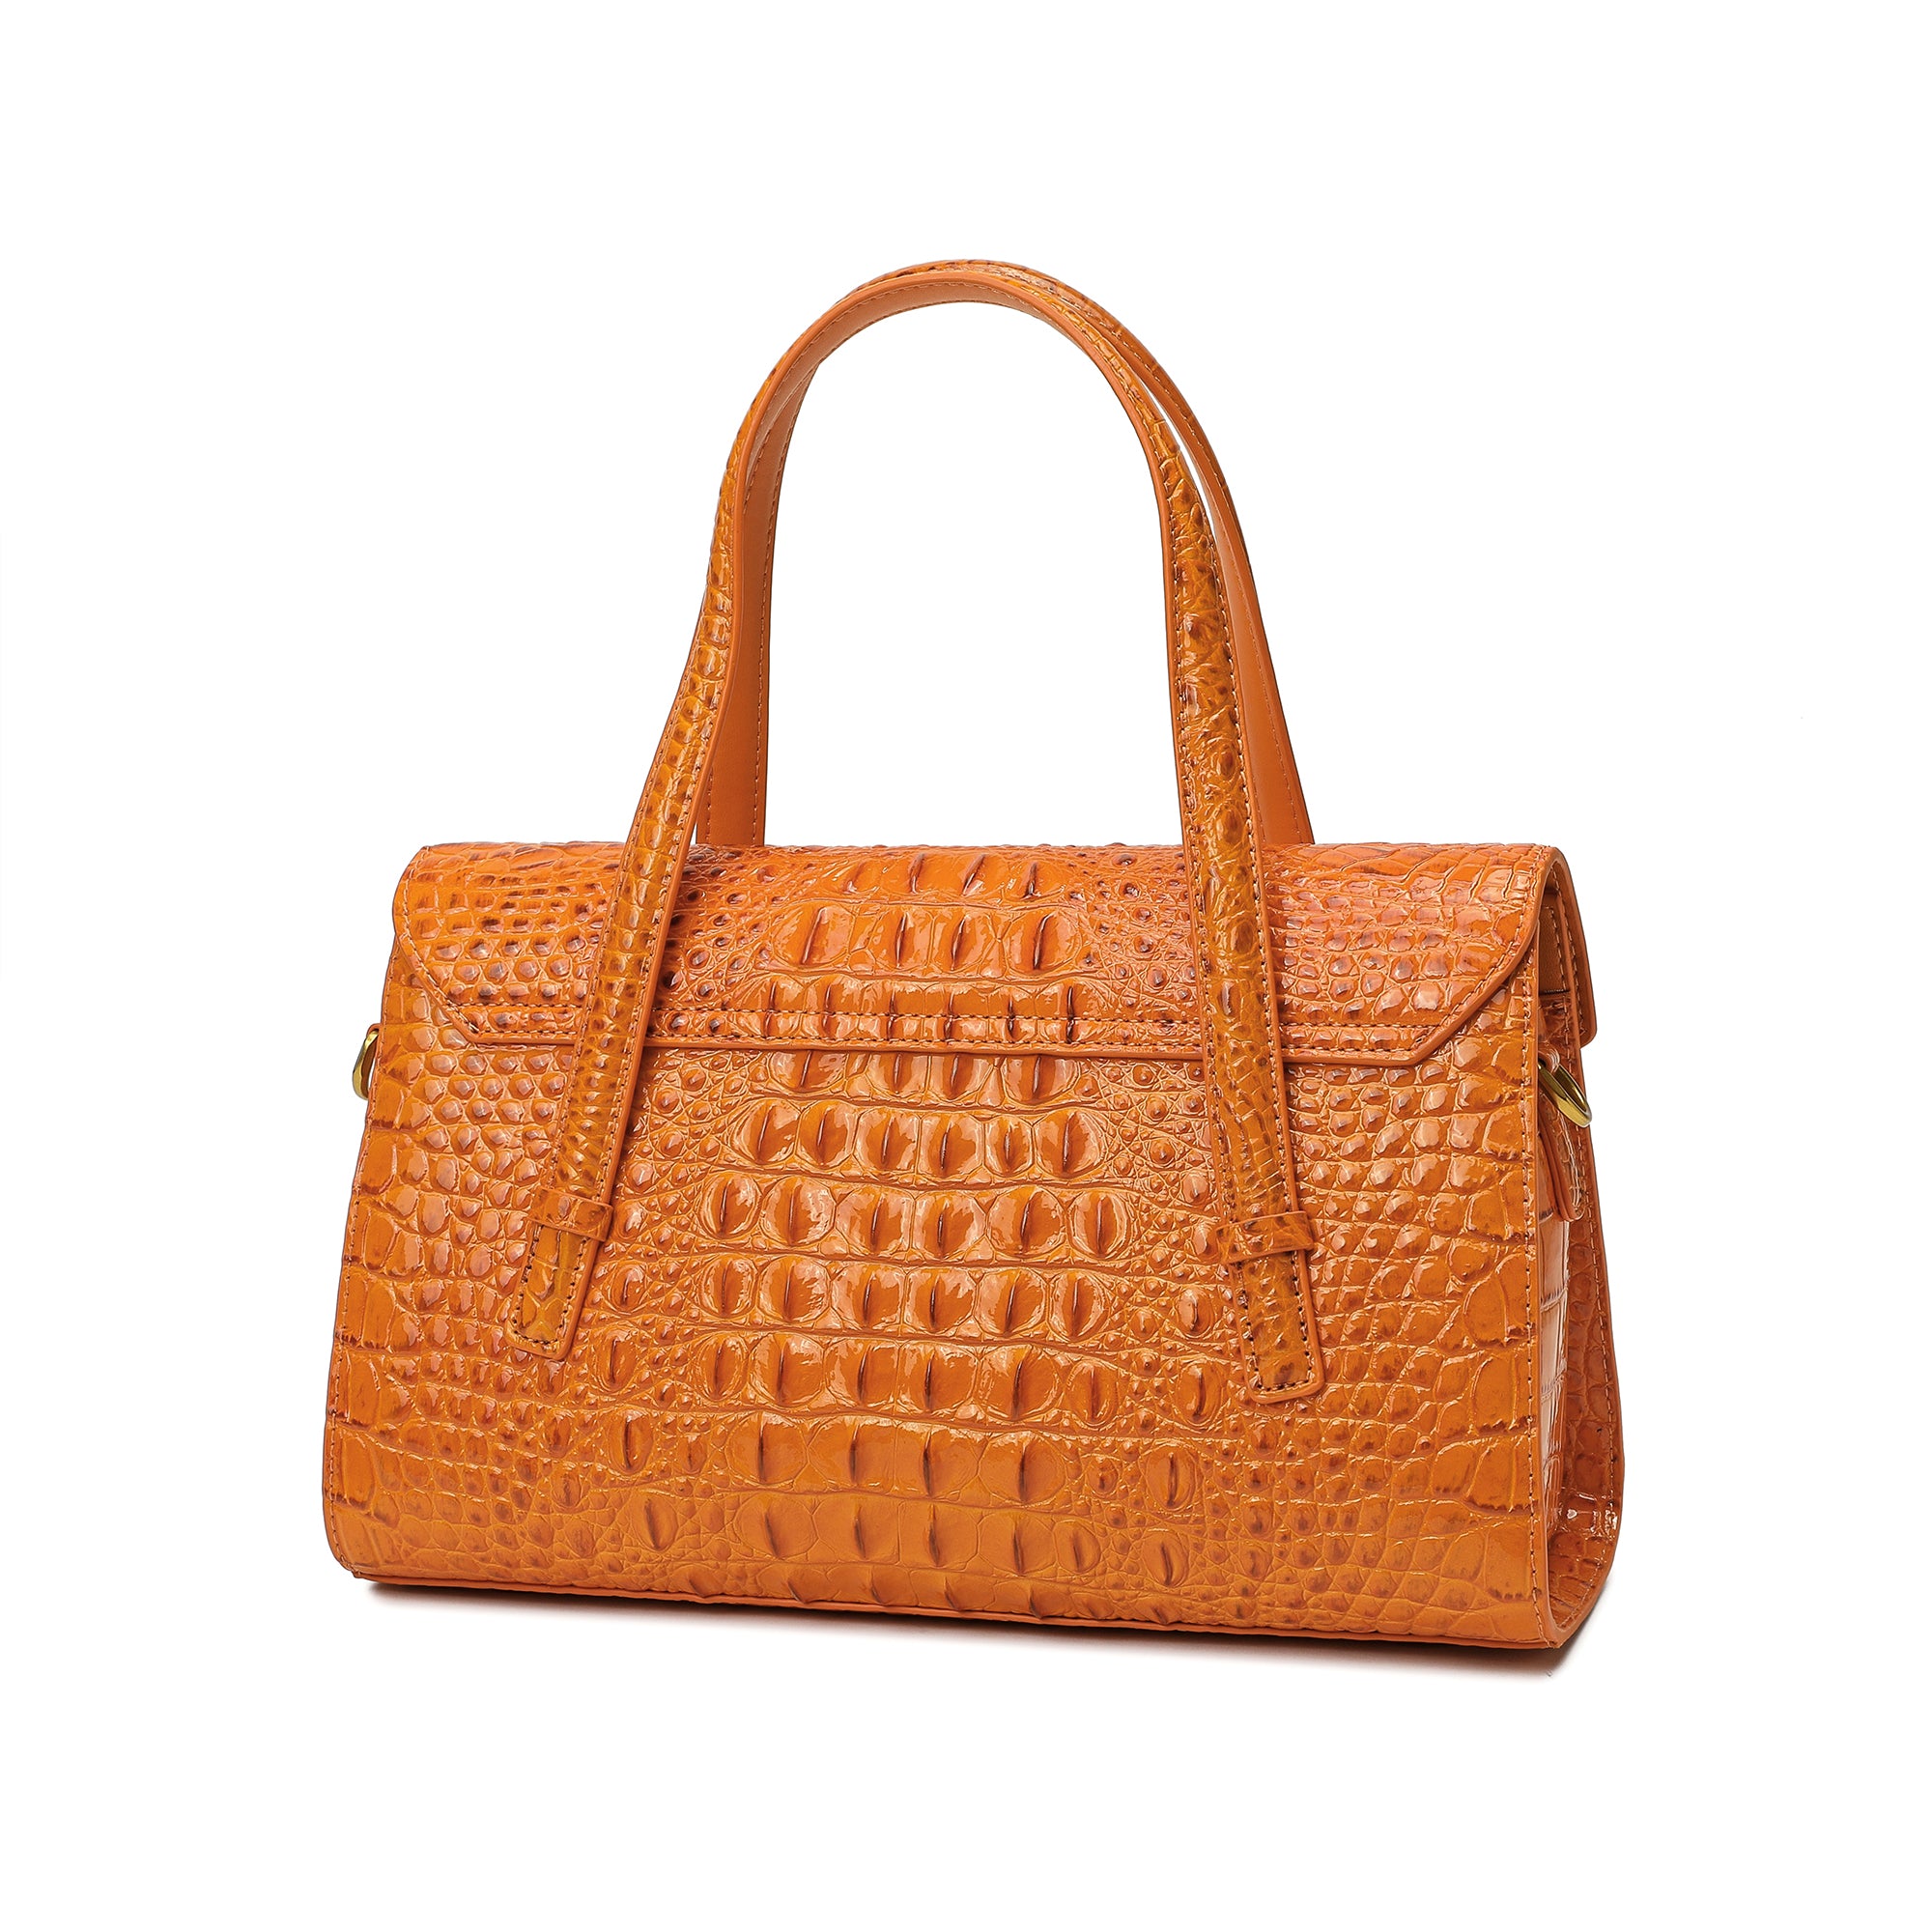 Aegte Carry it in Style Croco Tan Brown Leather Bag with Detachable Sling  Strap